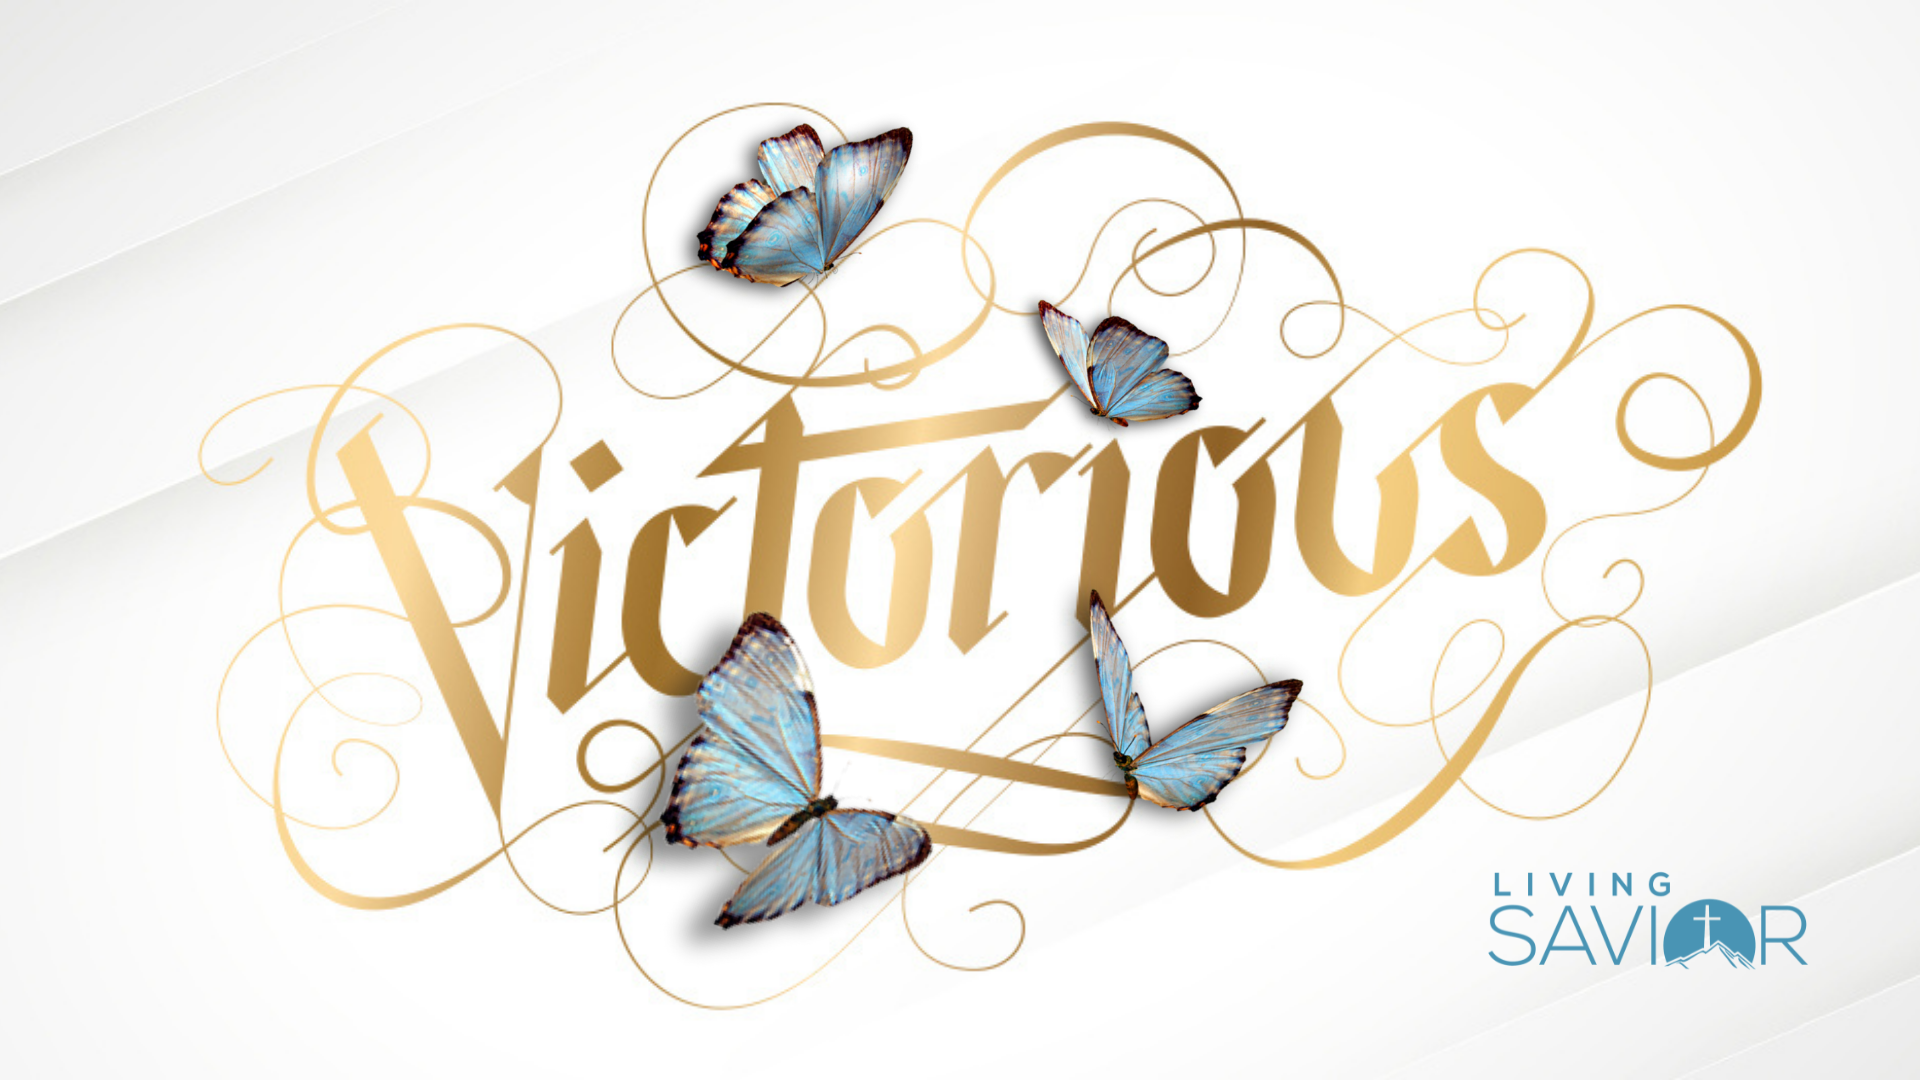 victorious, with logo